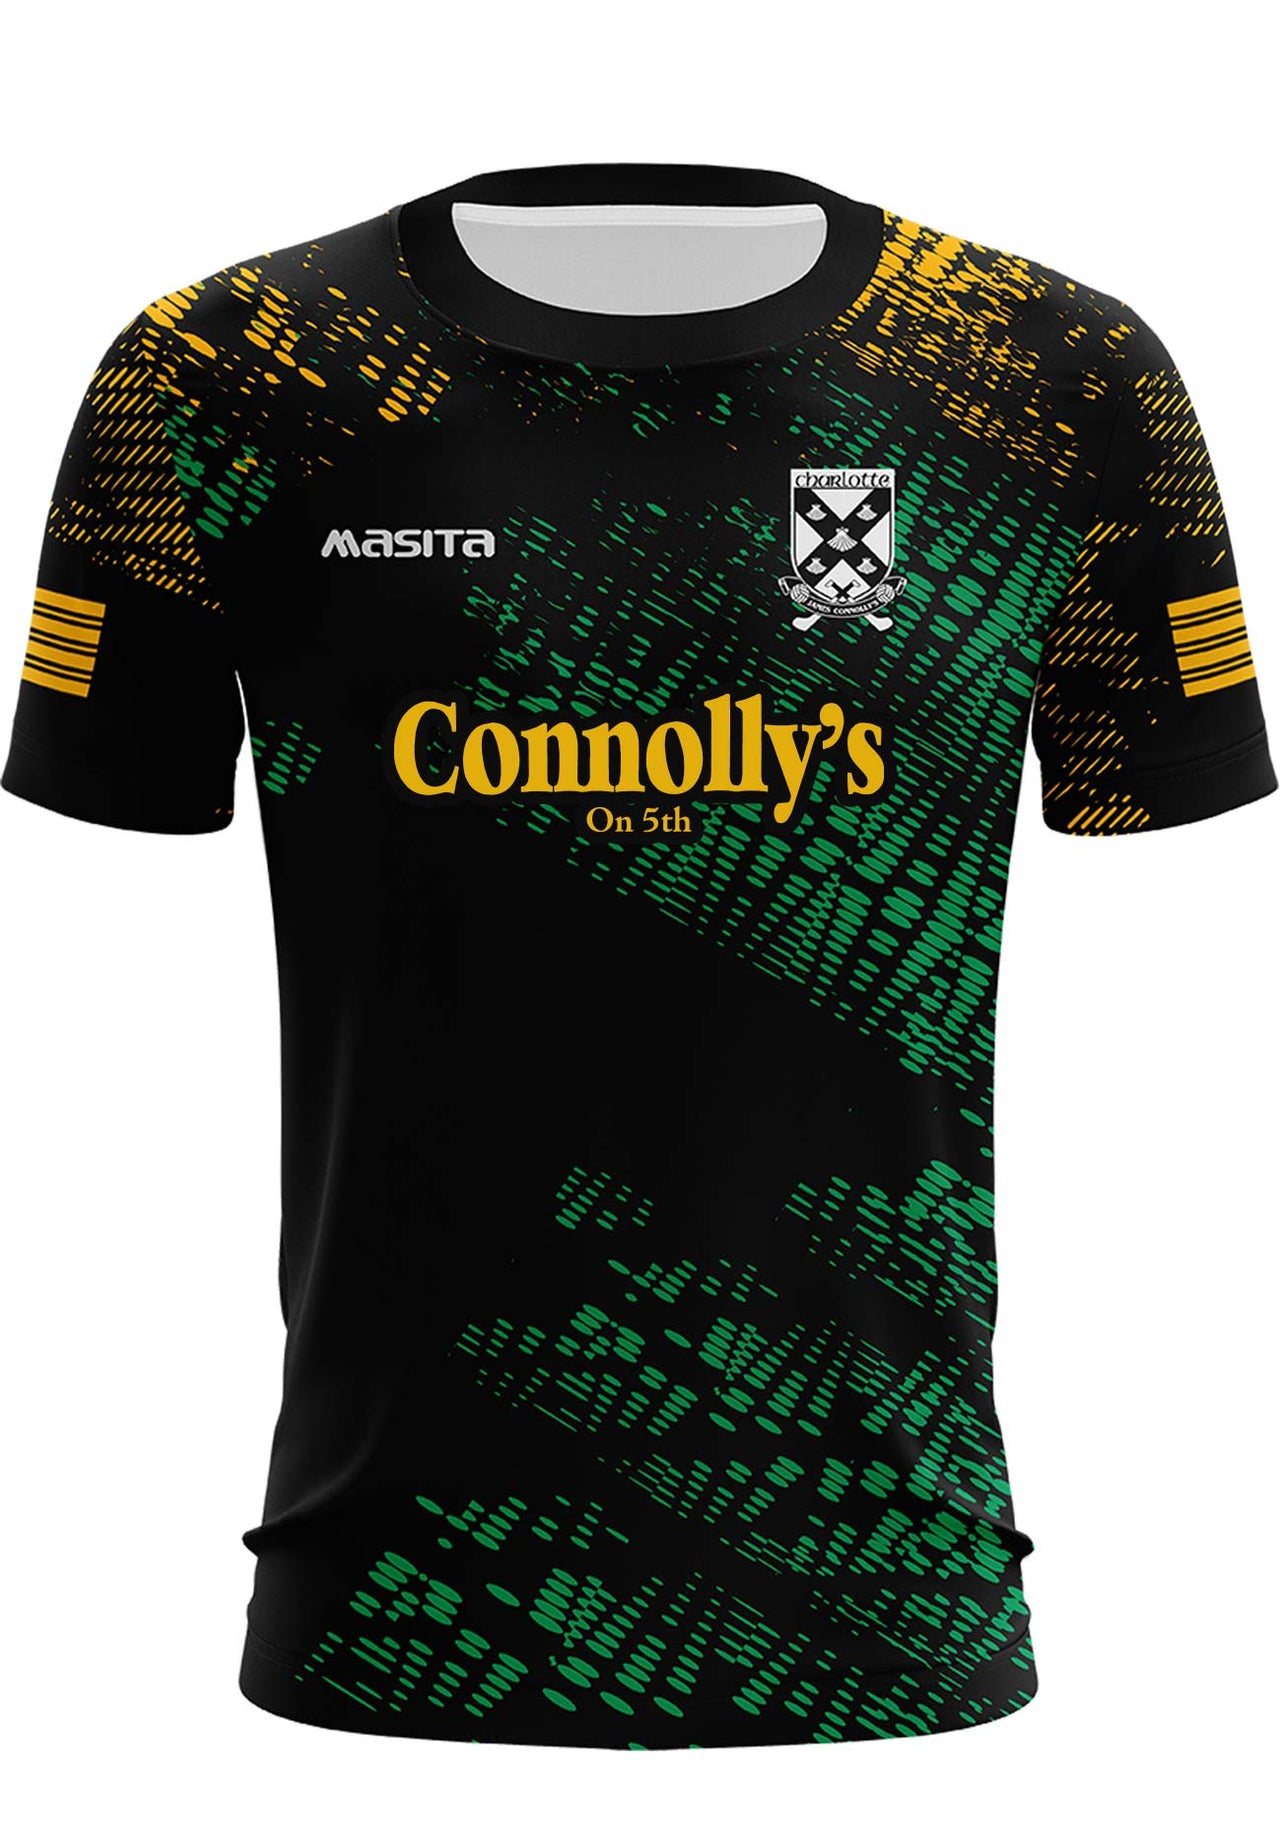 Charlotte James Connolly's Training Jersey Player Fit Adult